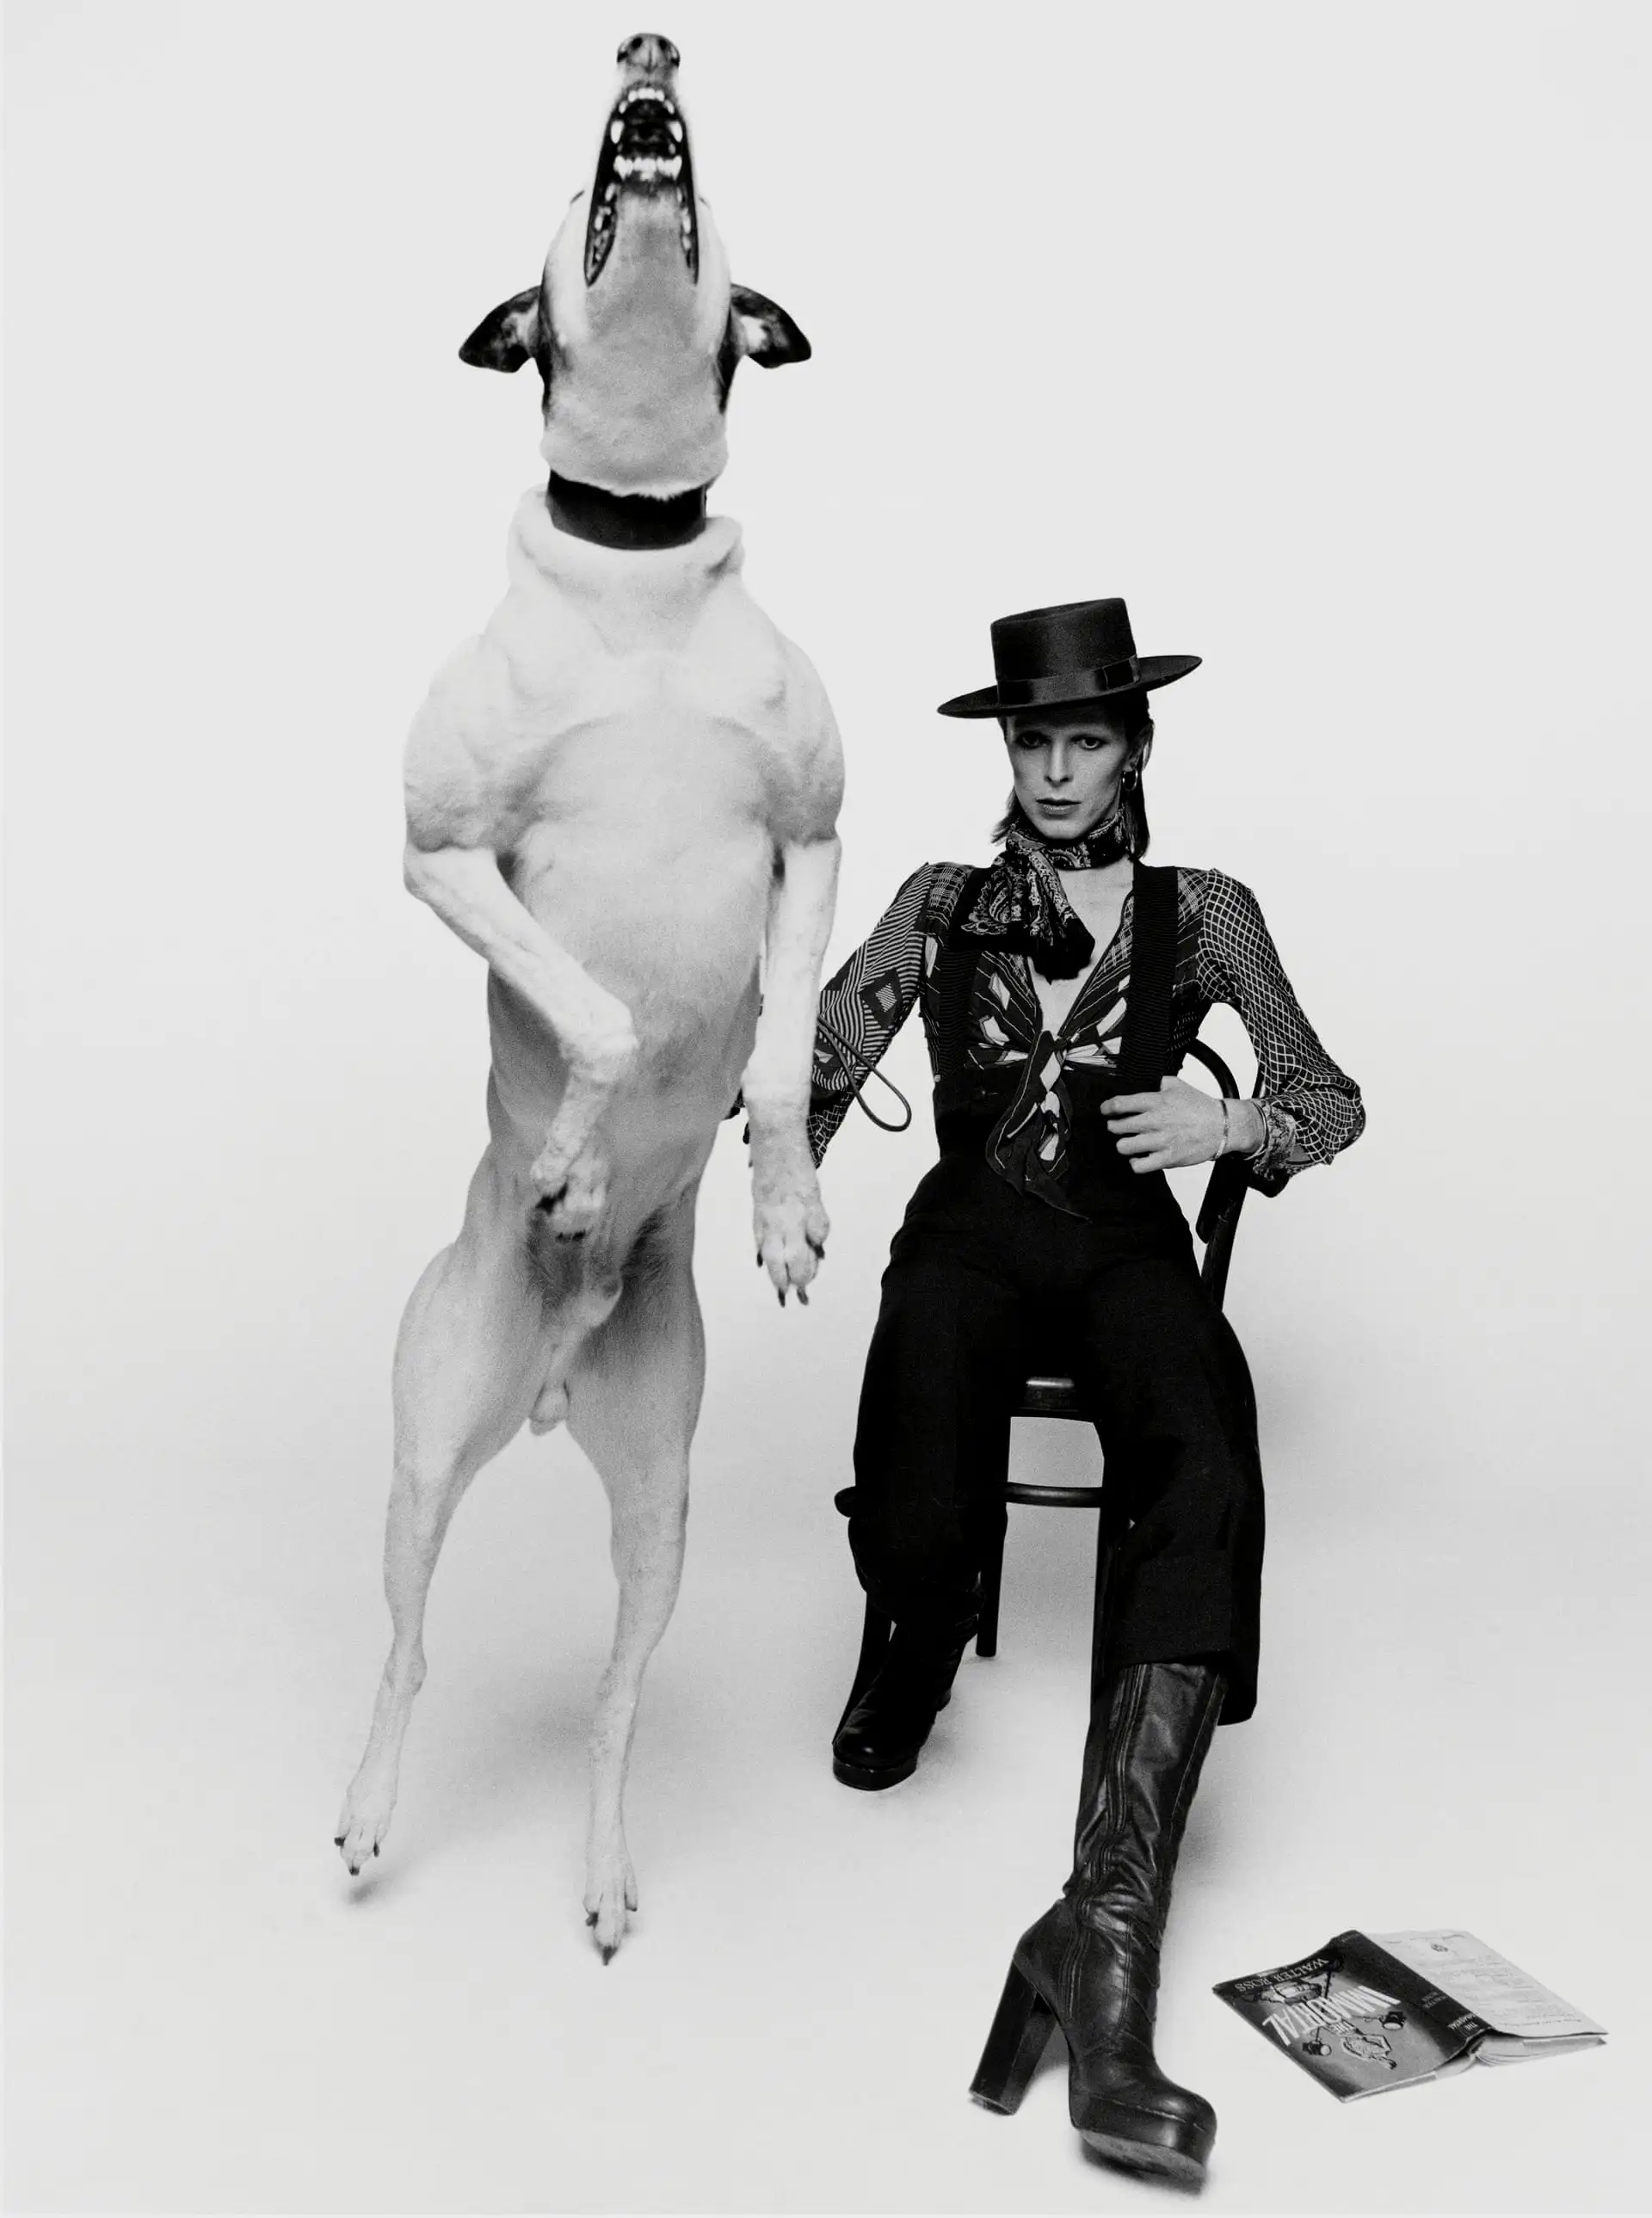 Terry O'Neill 所拍摄的 David Bowie